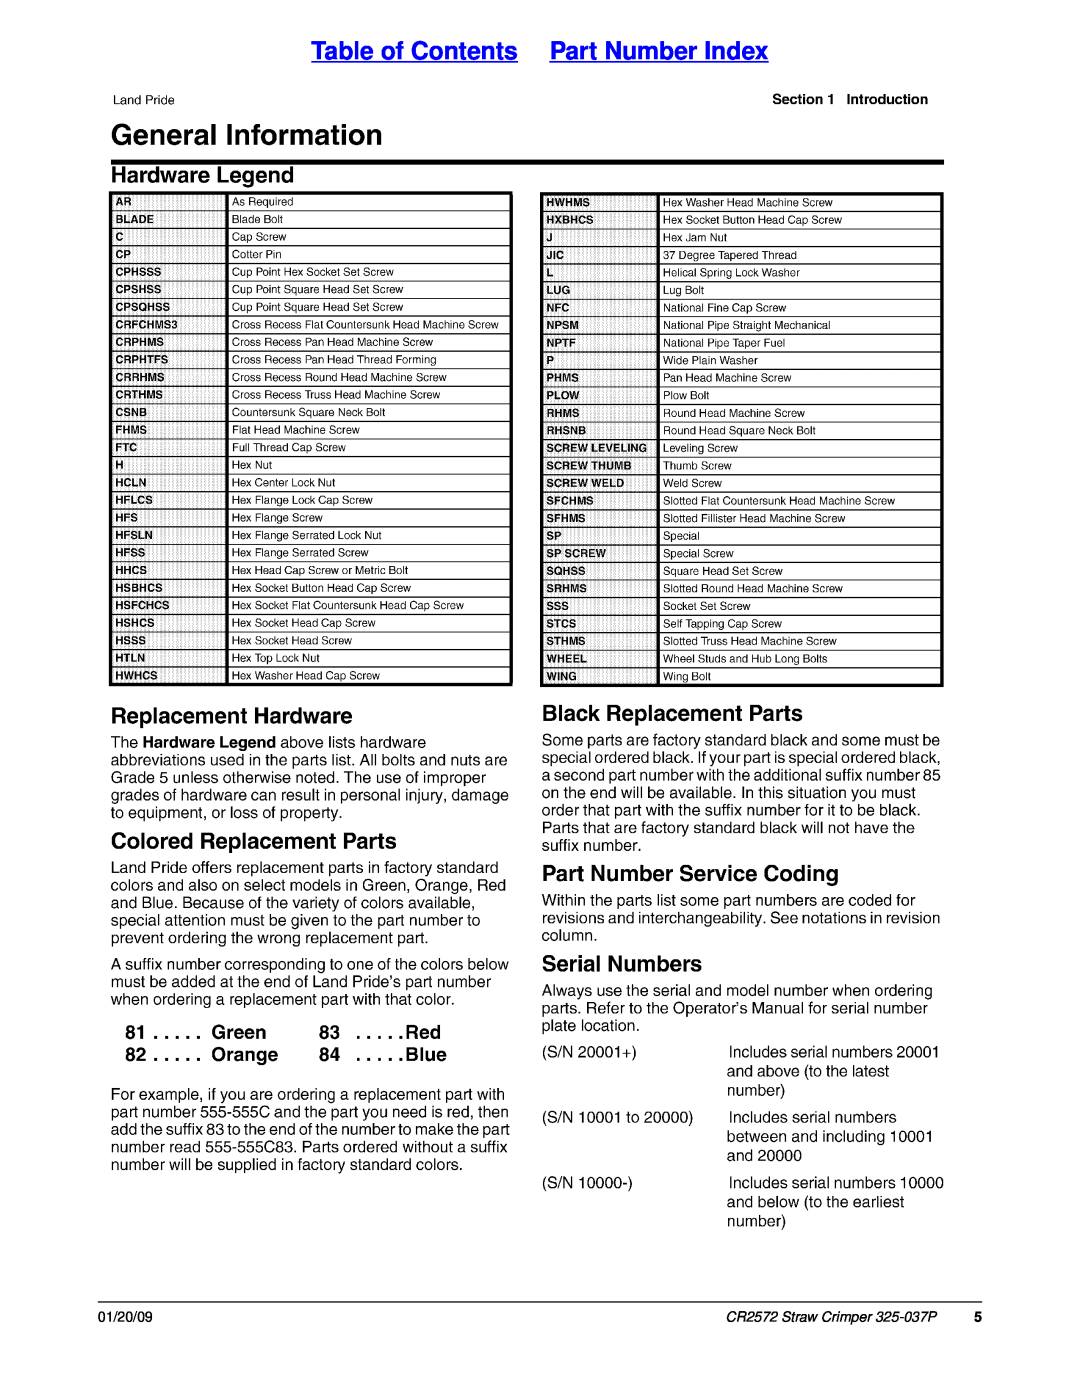 Land Pride manual Table of Contents Part Number Index, CR2572 Straw Crimper 325-037P, 01/20/09 